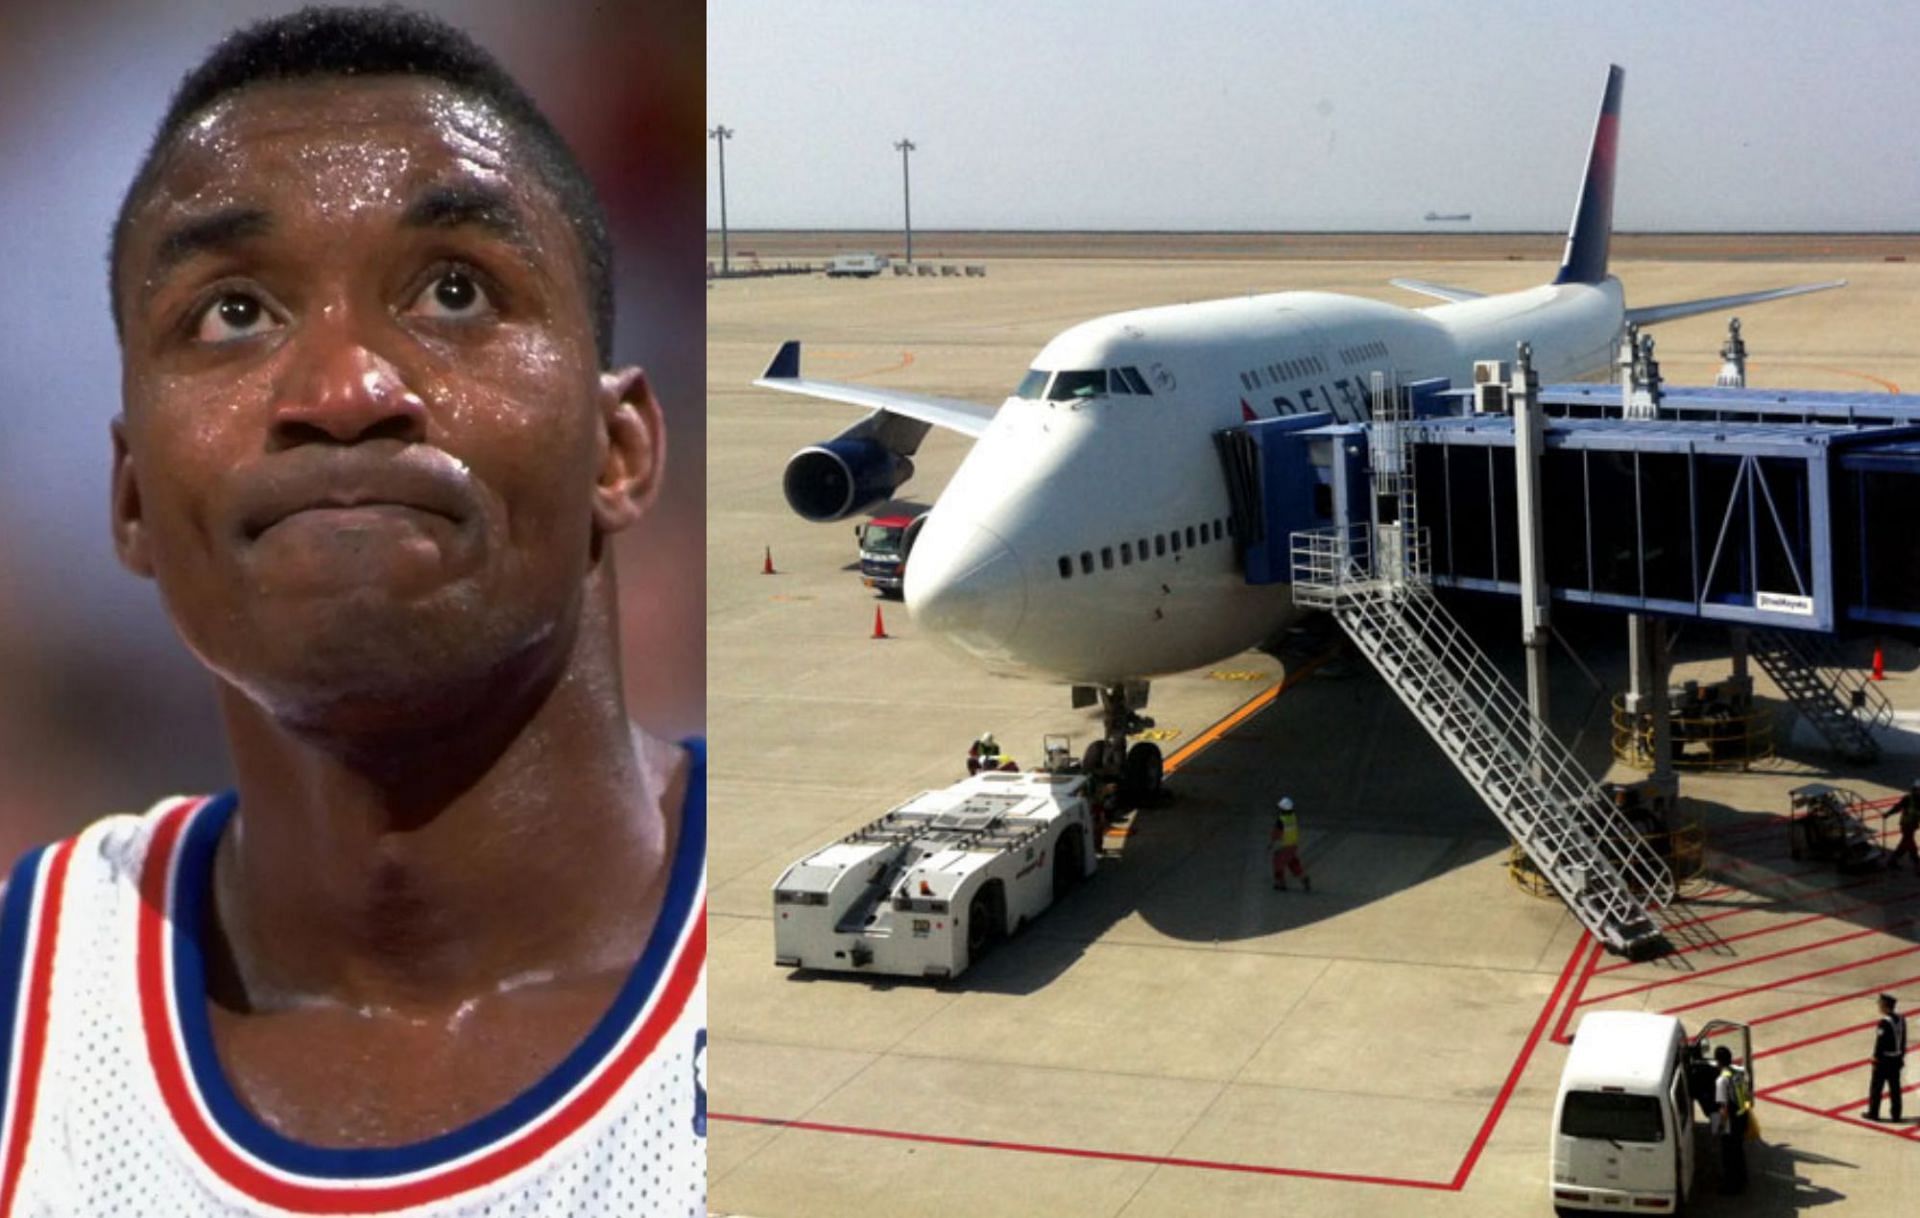 Isiah Thomas airs out his frustration with Delta Airlines on social media